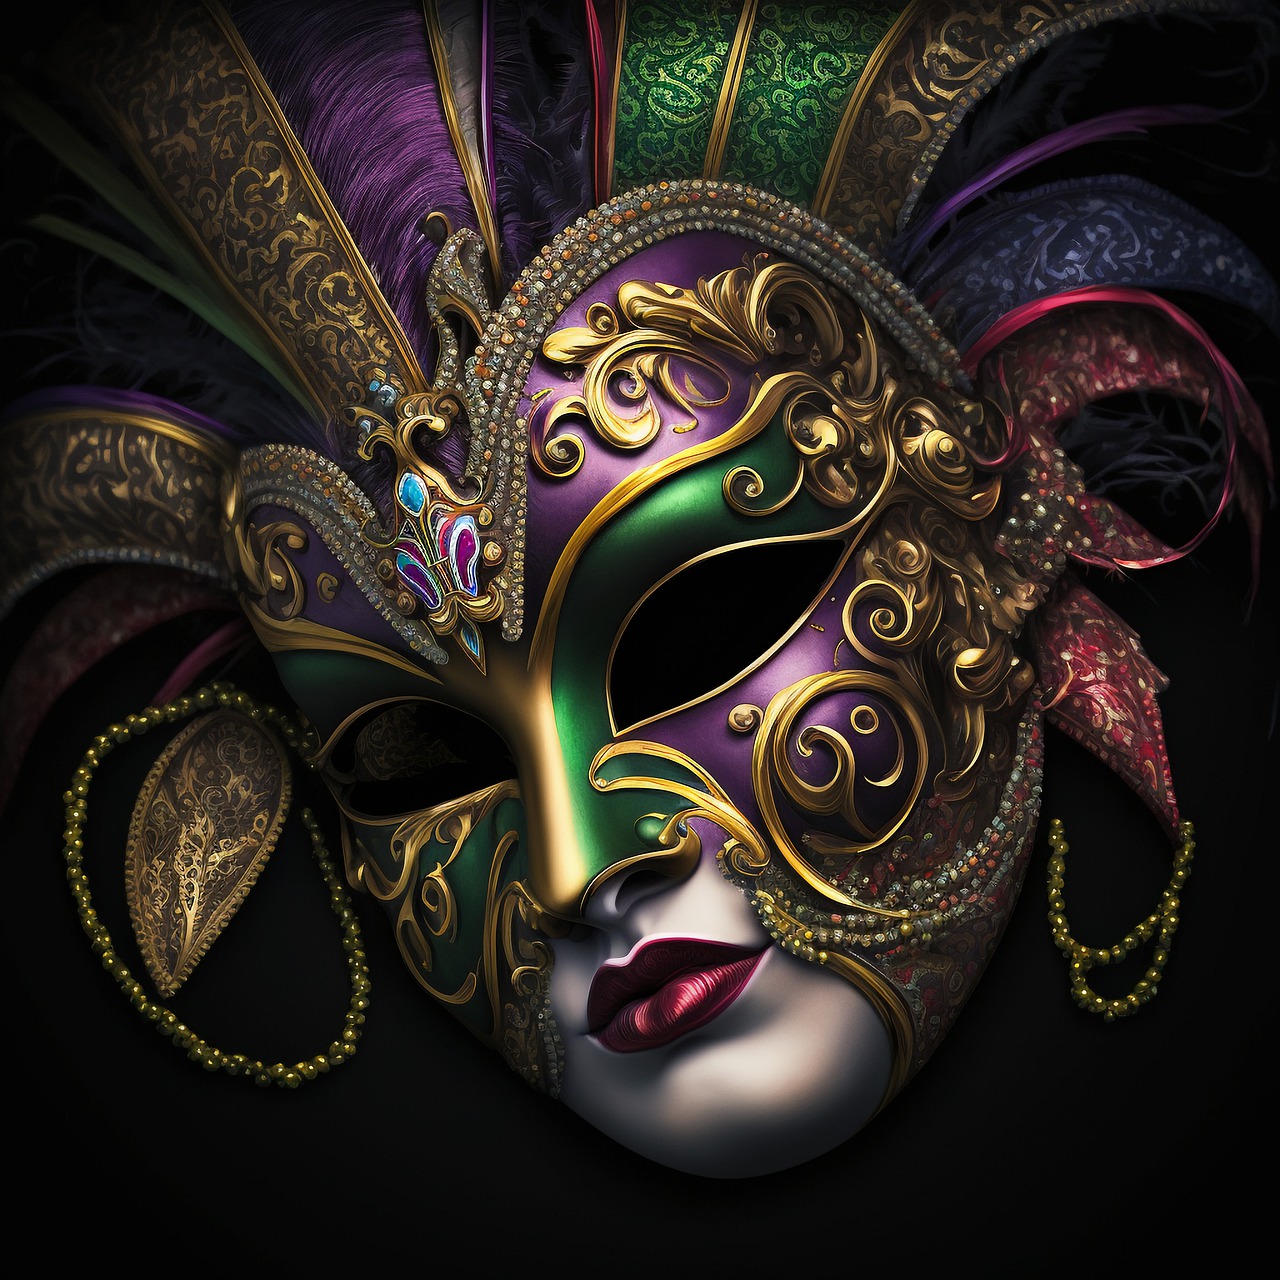 What To Wear At Masquerade Party